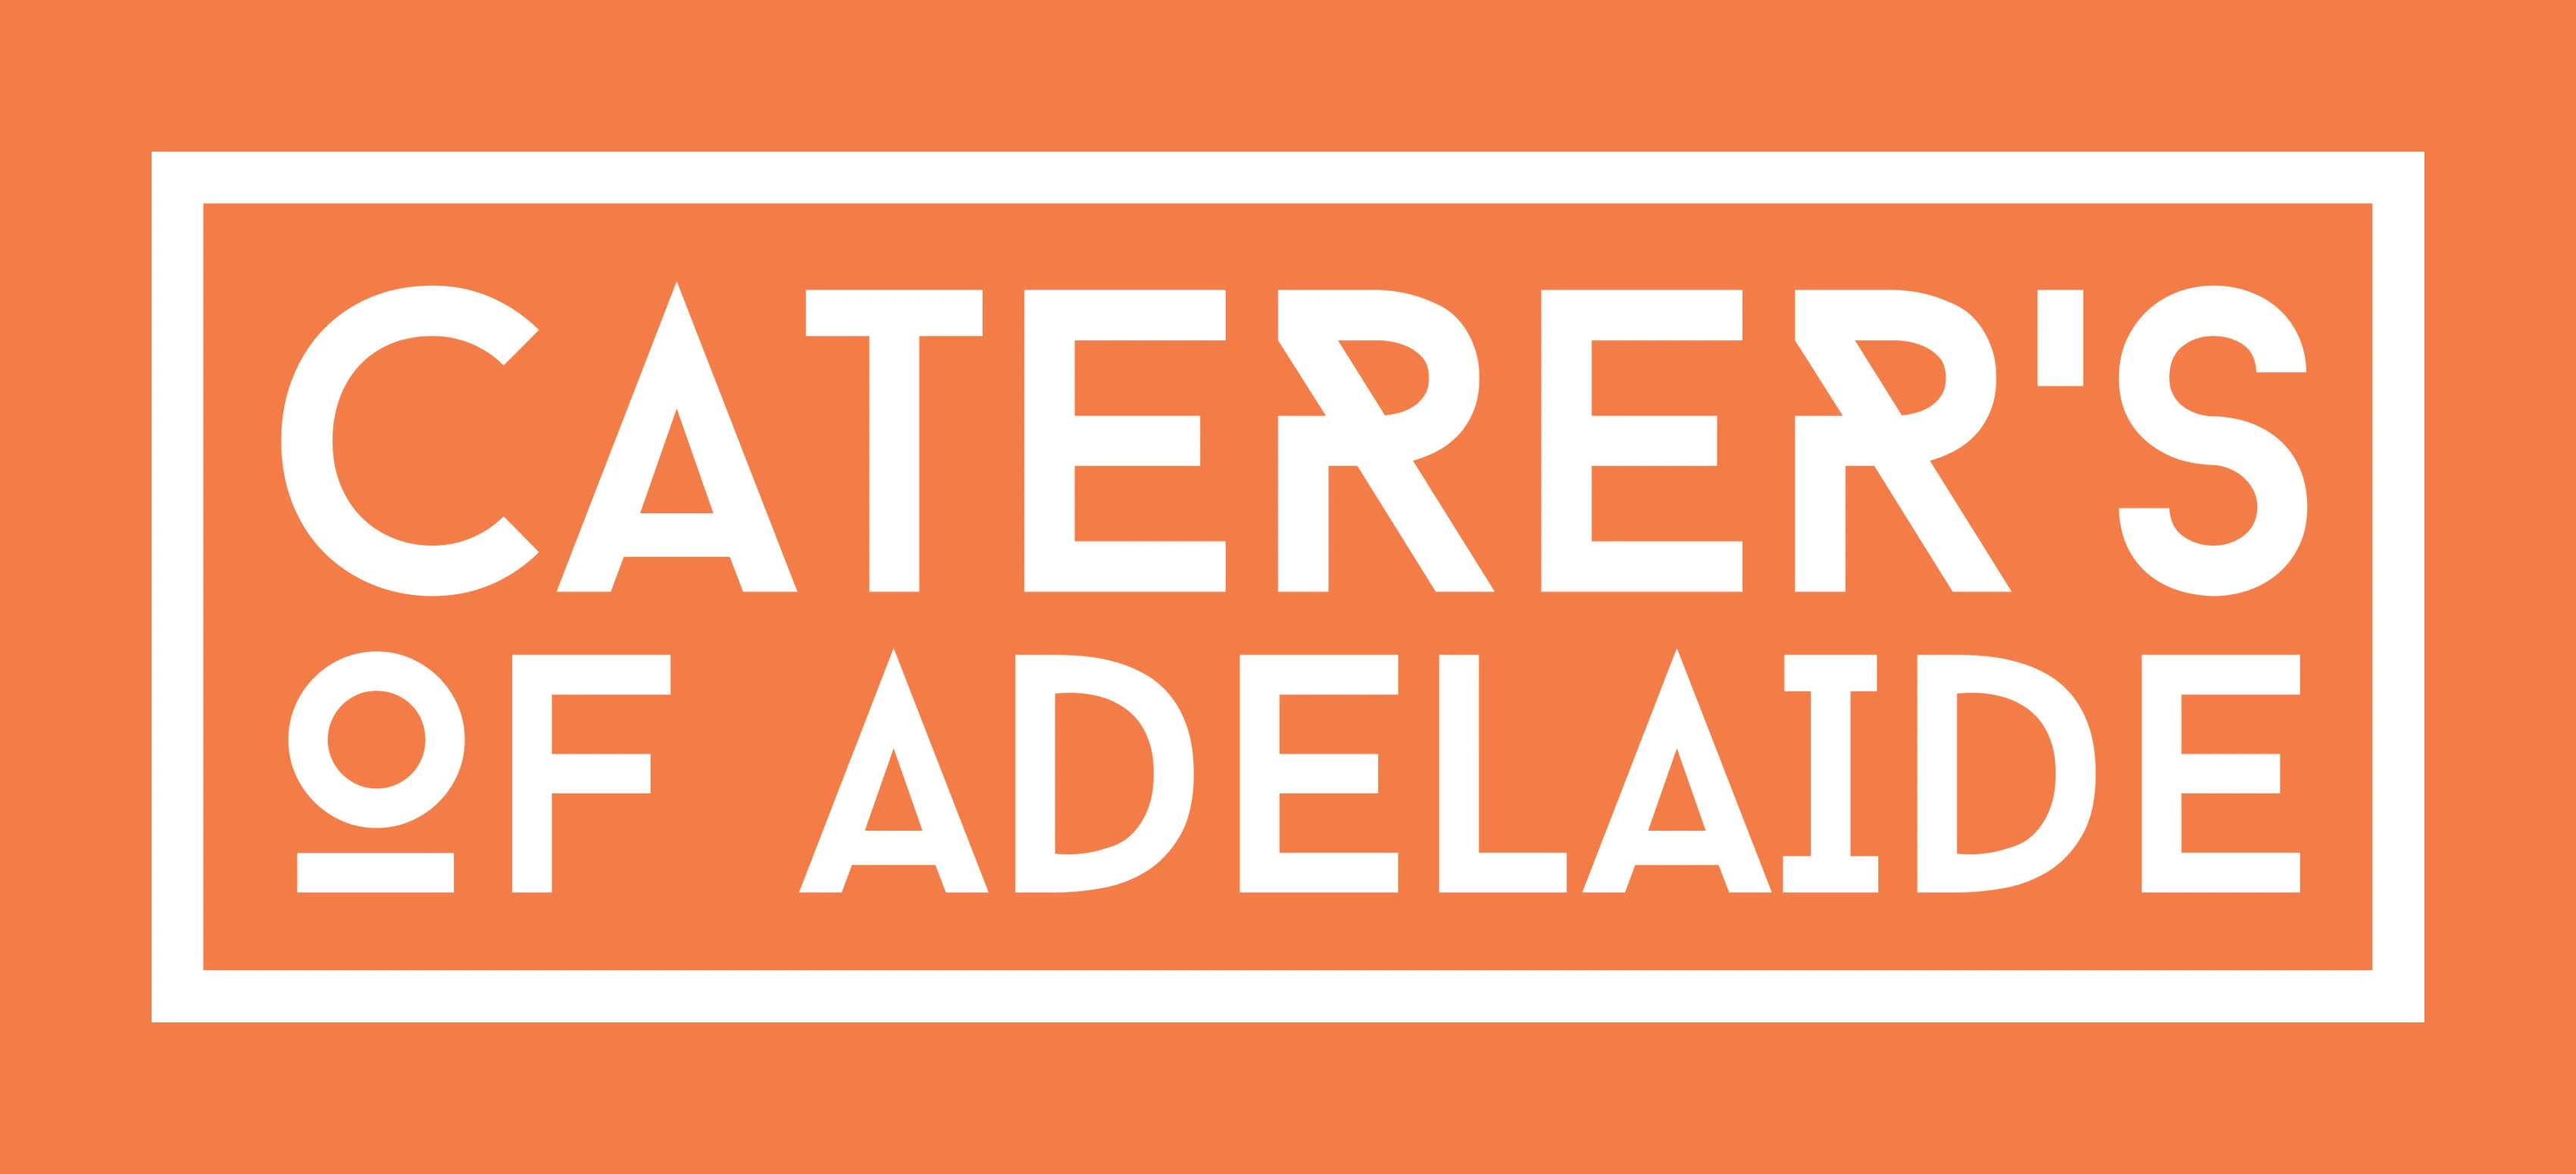 Caterers of Adelaide